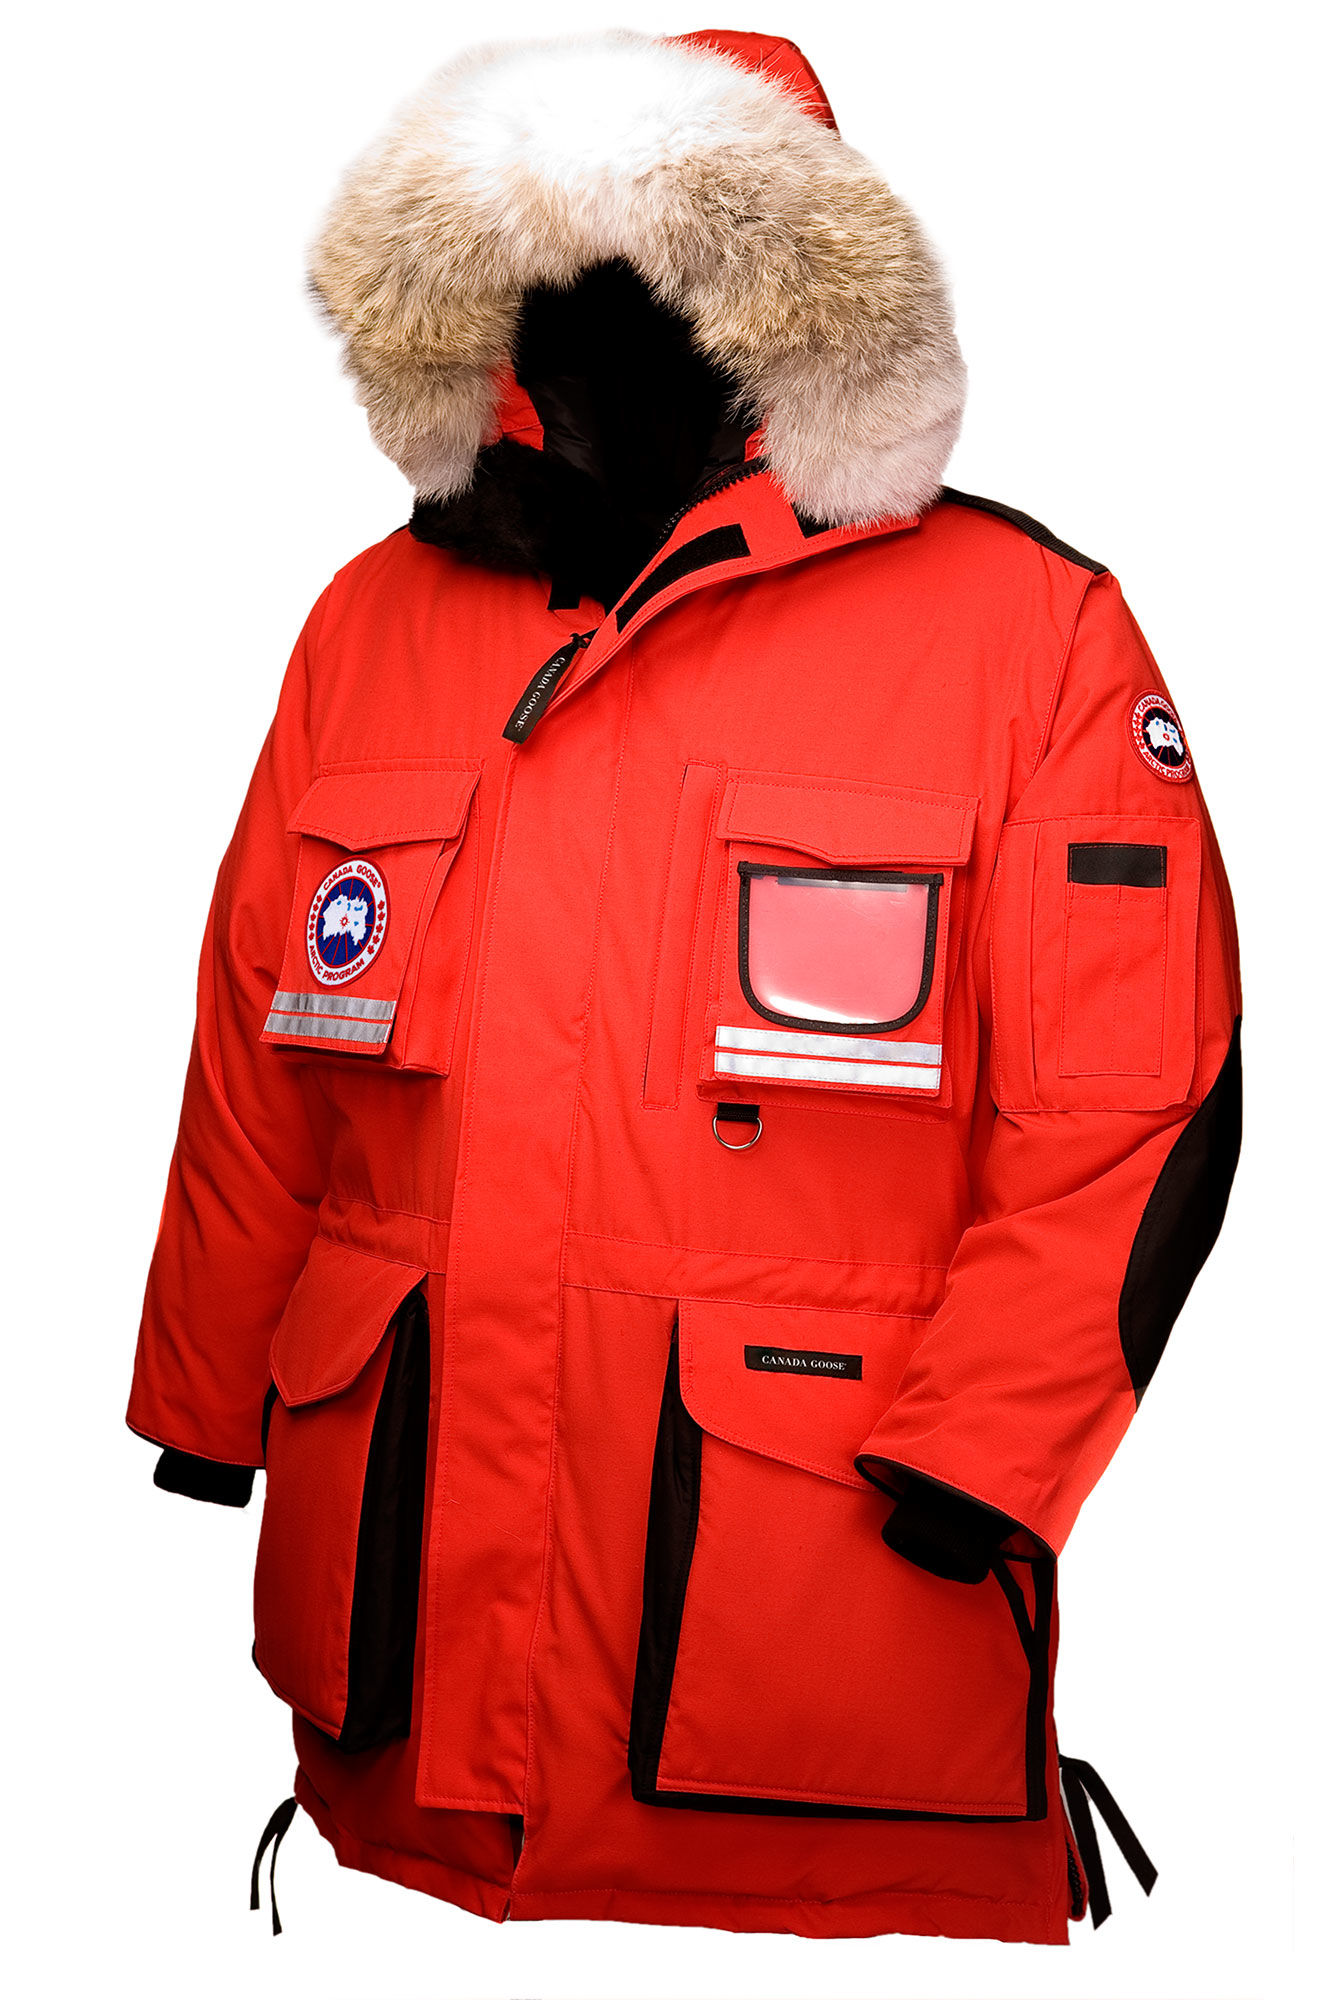 Canada Goose down sale discounts - 7 Warmest Jackets In The World That Won't Break The Bank �� PHOTOS ...